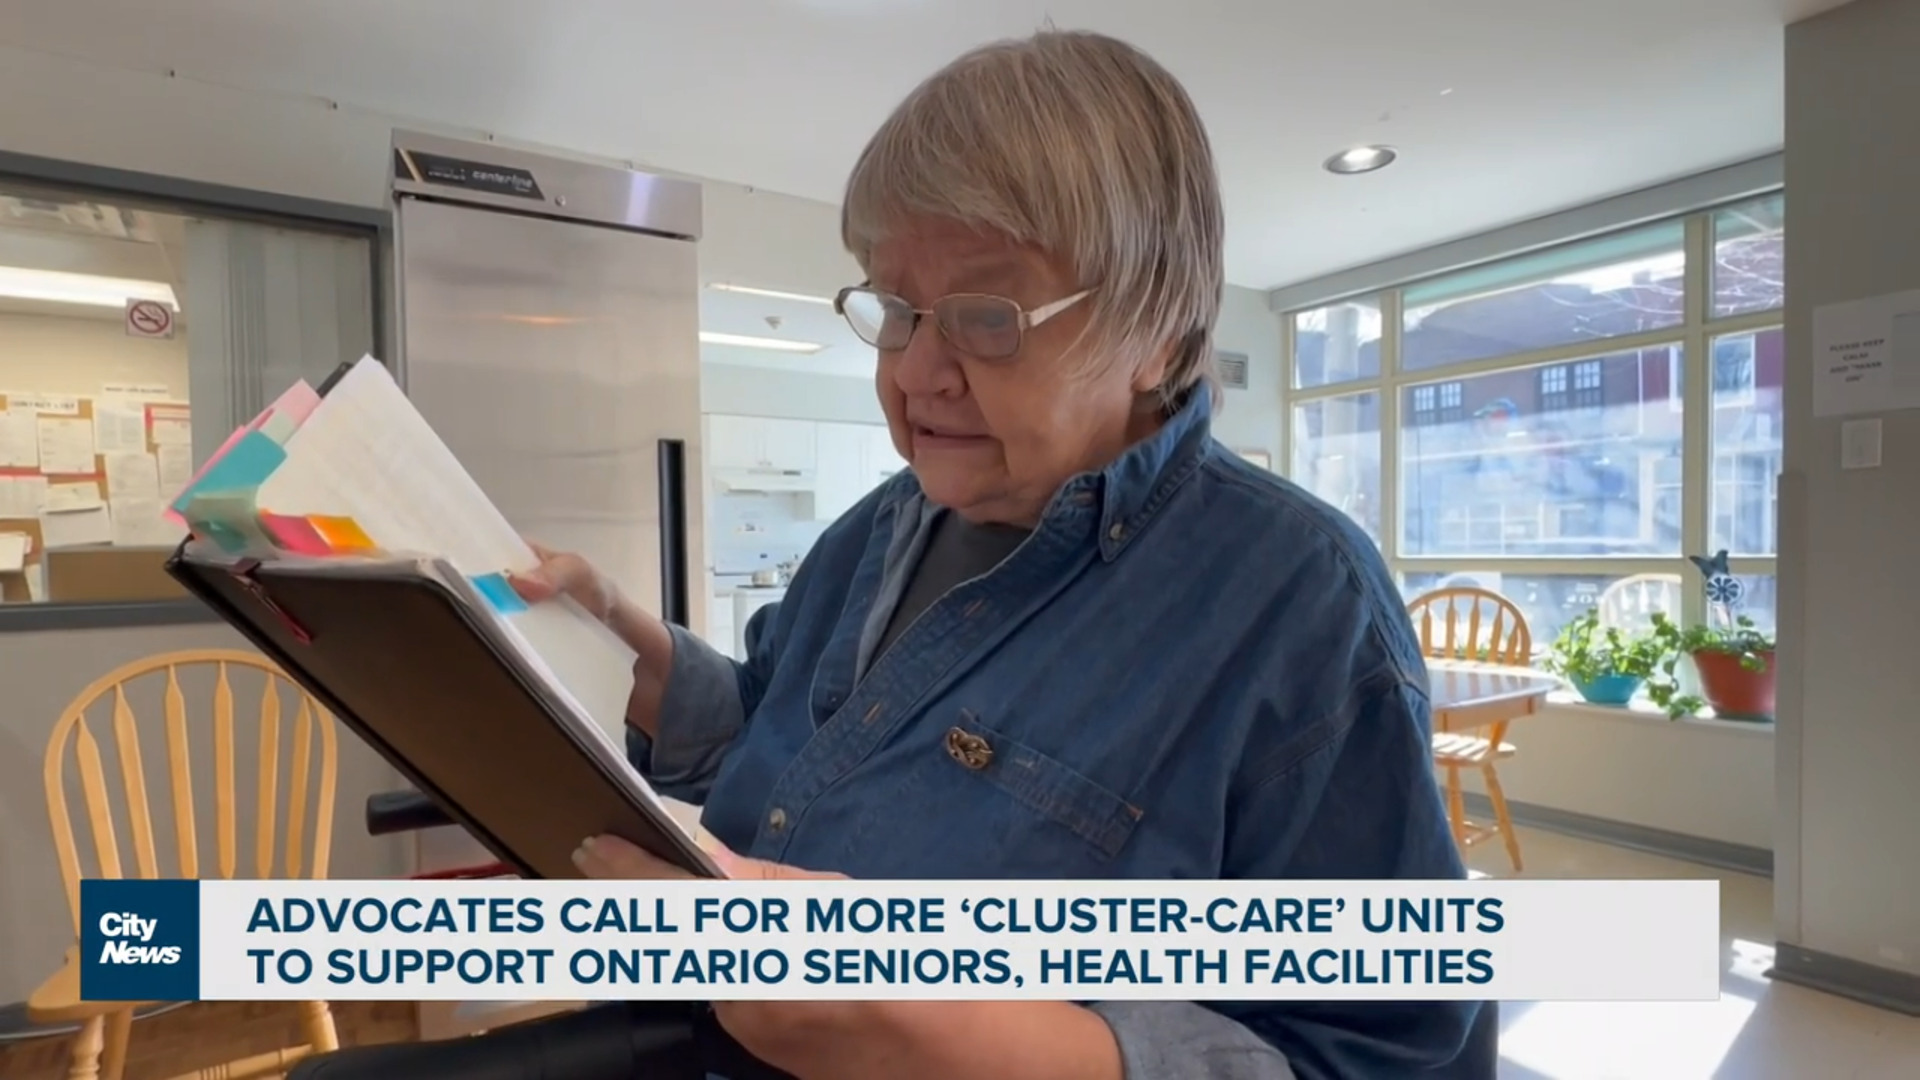 Advocates call for more ‘cluster-care’ units to support Ontario seniors, health facilities